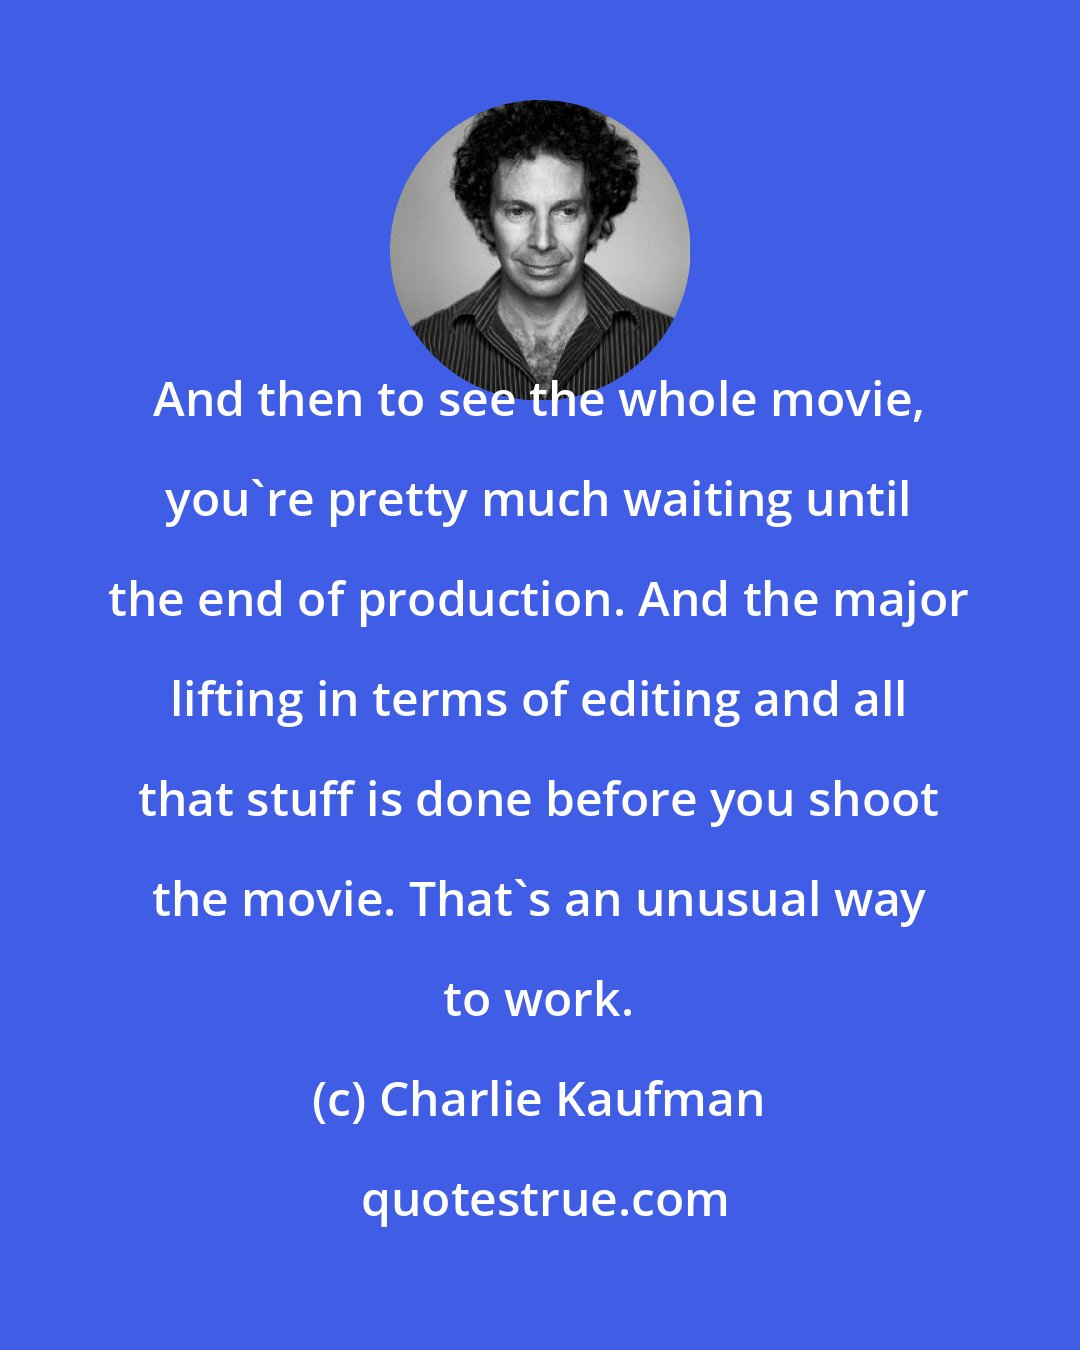 Charlie Kaufman: And then to see the whole movie, you're pretty much waiting until the end of production. And the major lifting in terms of editing and all that stuff is done before you shoot the movie. That's an unusual way to work.